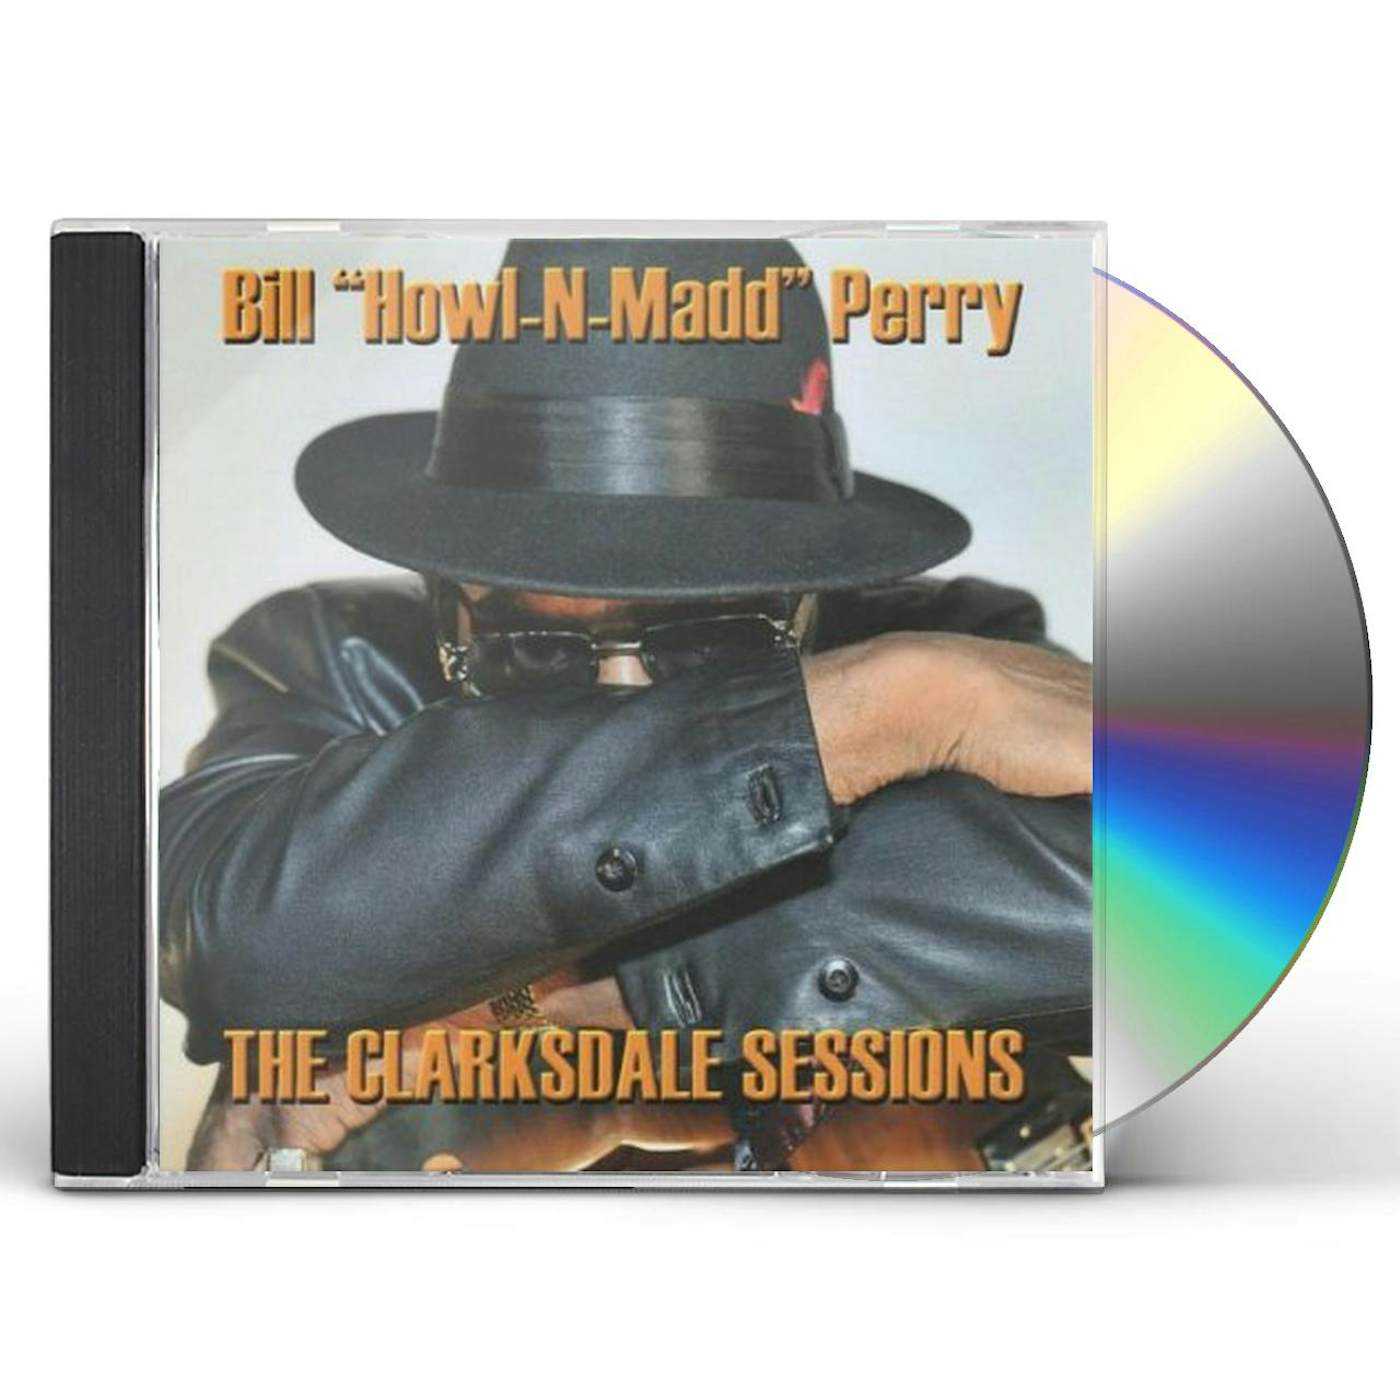 Bill Perry CLARKSDALE SESSIONS CD